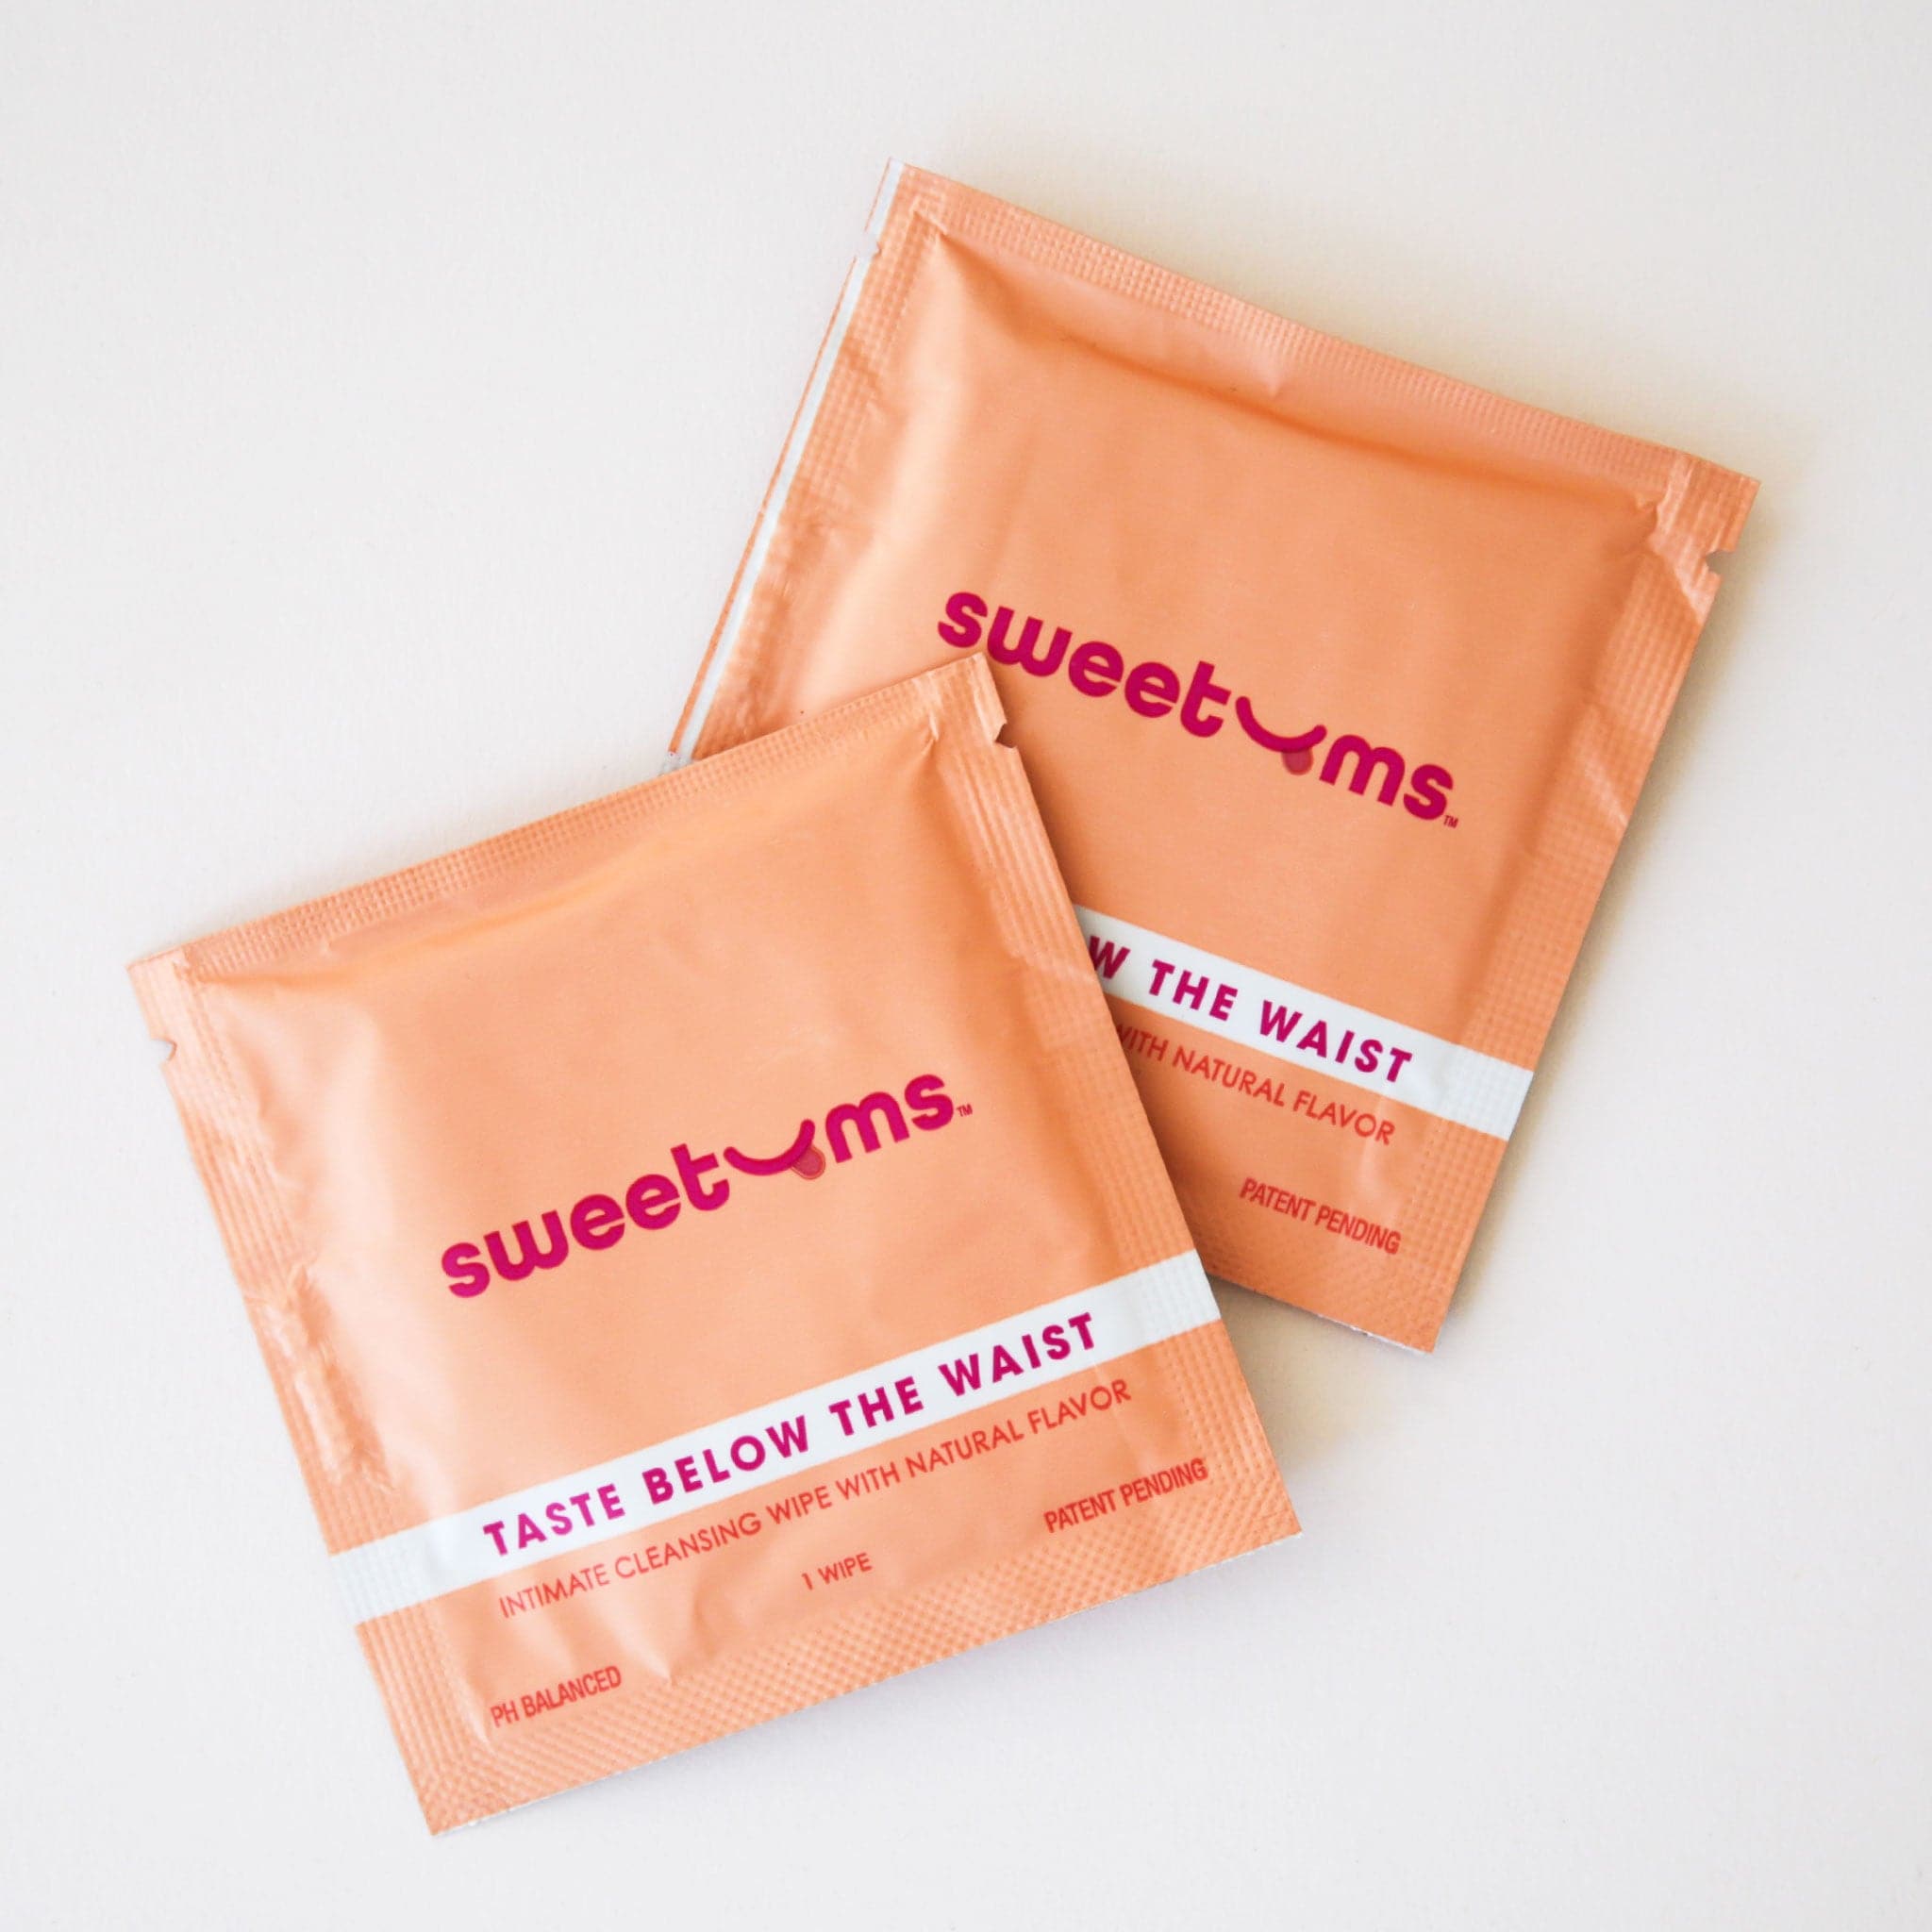 Individual packets of intimate cleaning wipes. Each scent has a different color packaging, and this mango flavor is orange.